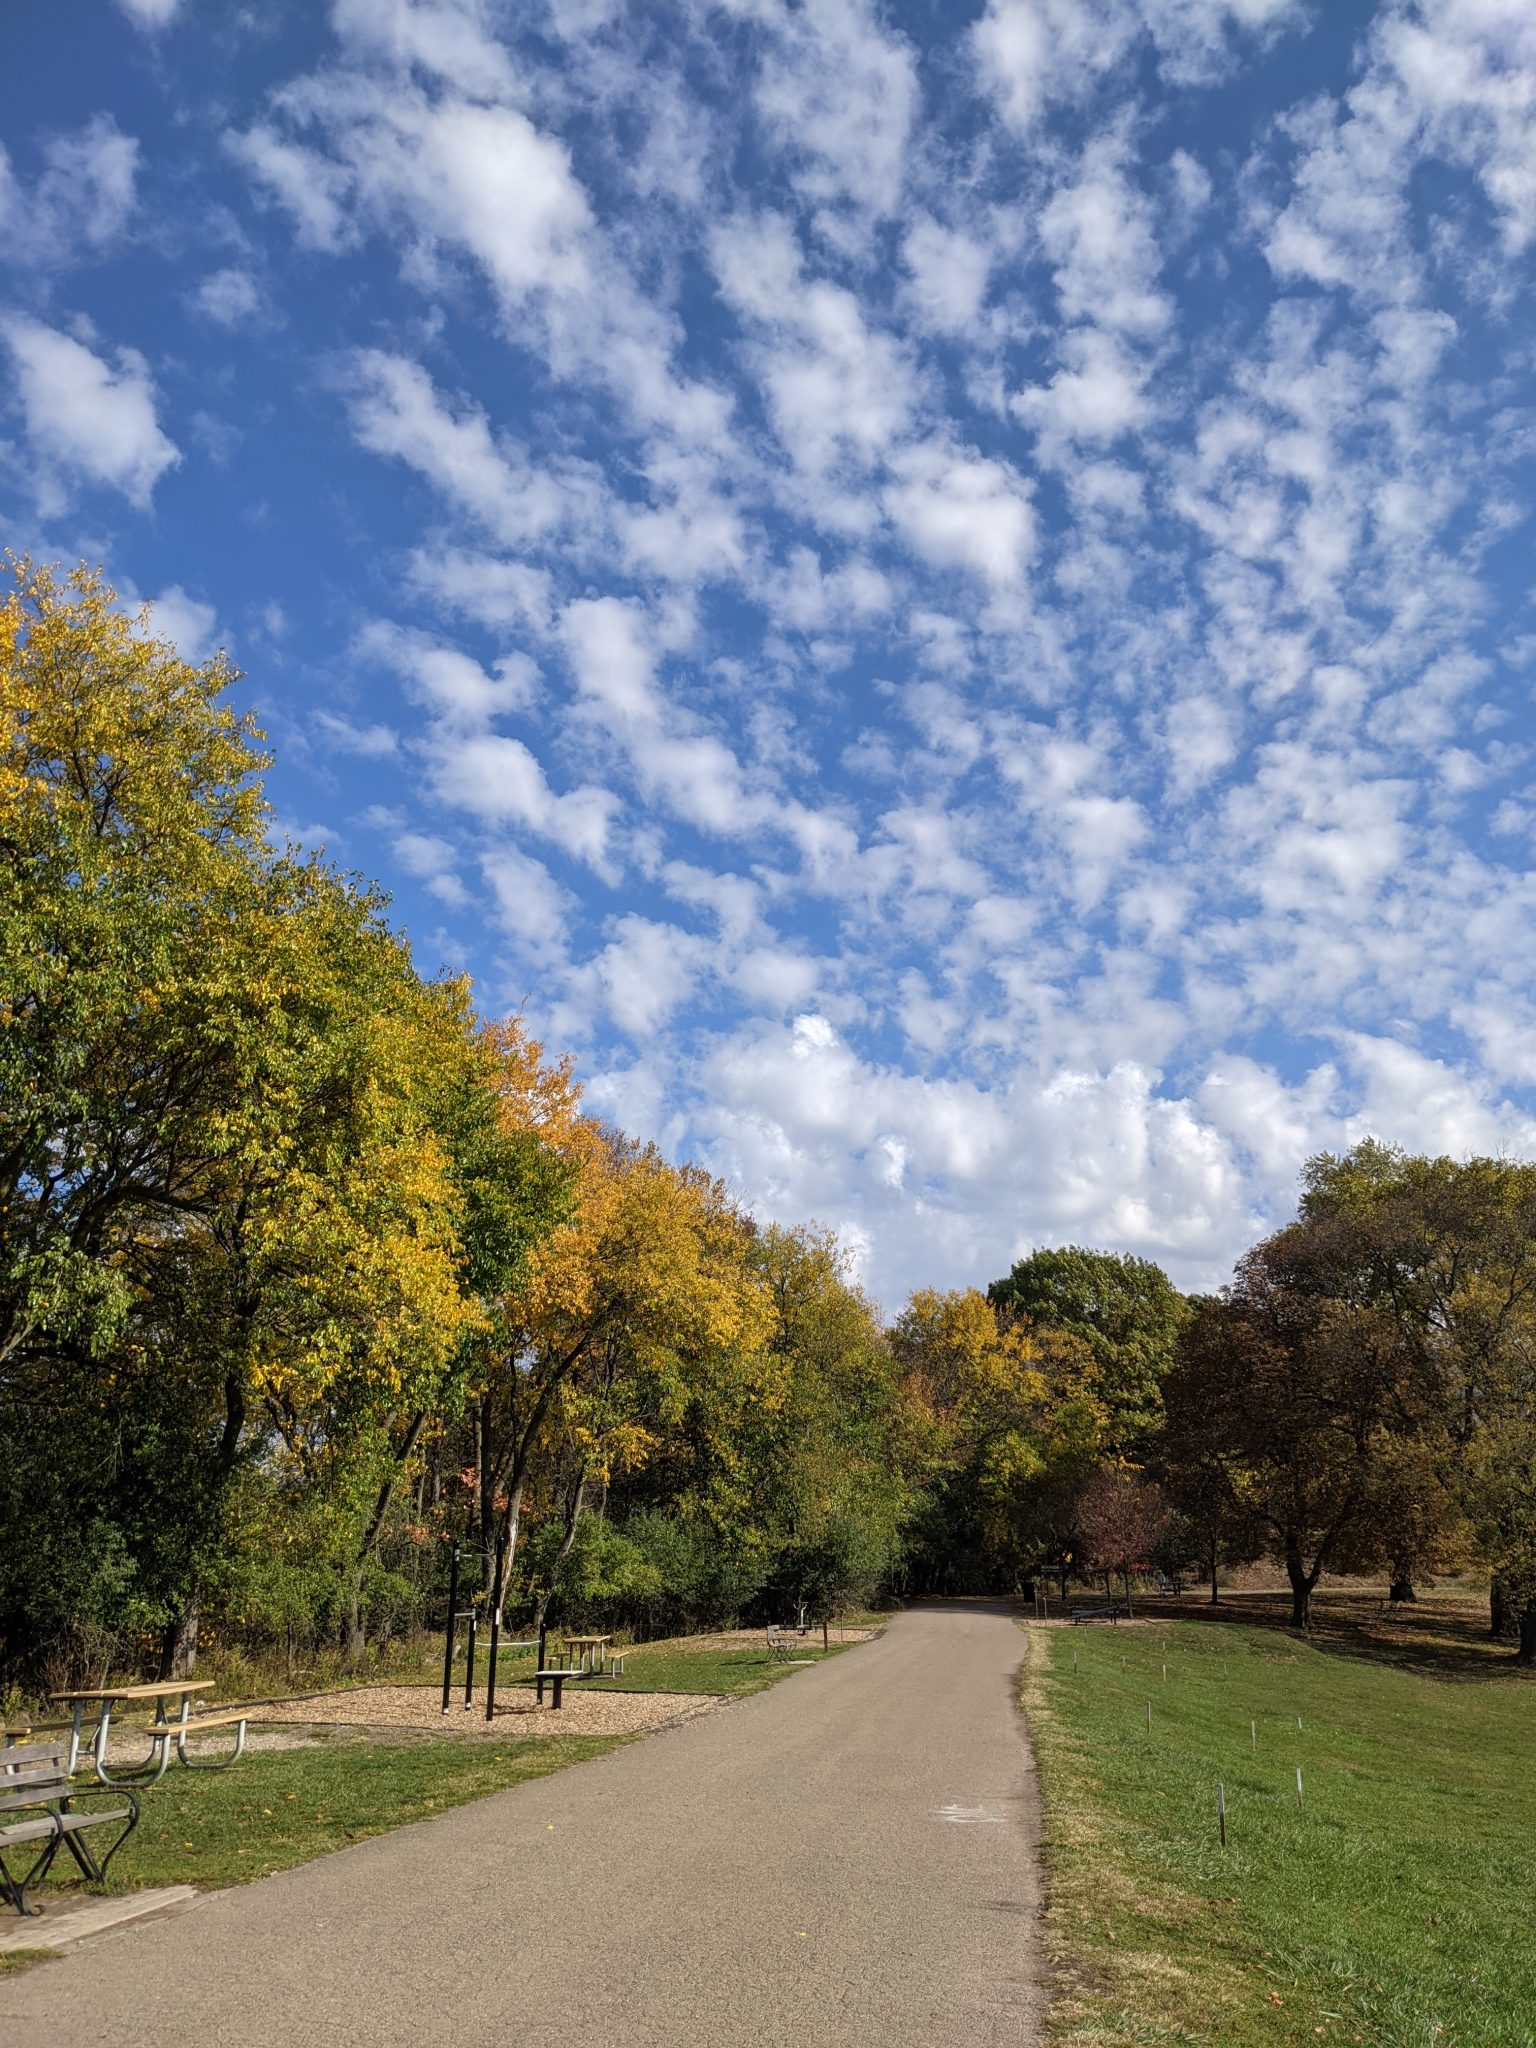 Very blue sky, with some clouds over green area in Pittsburgh's Frick Park